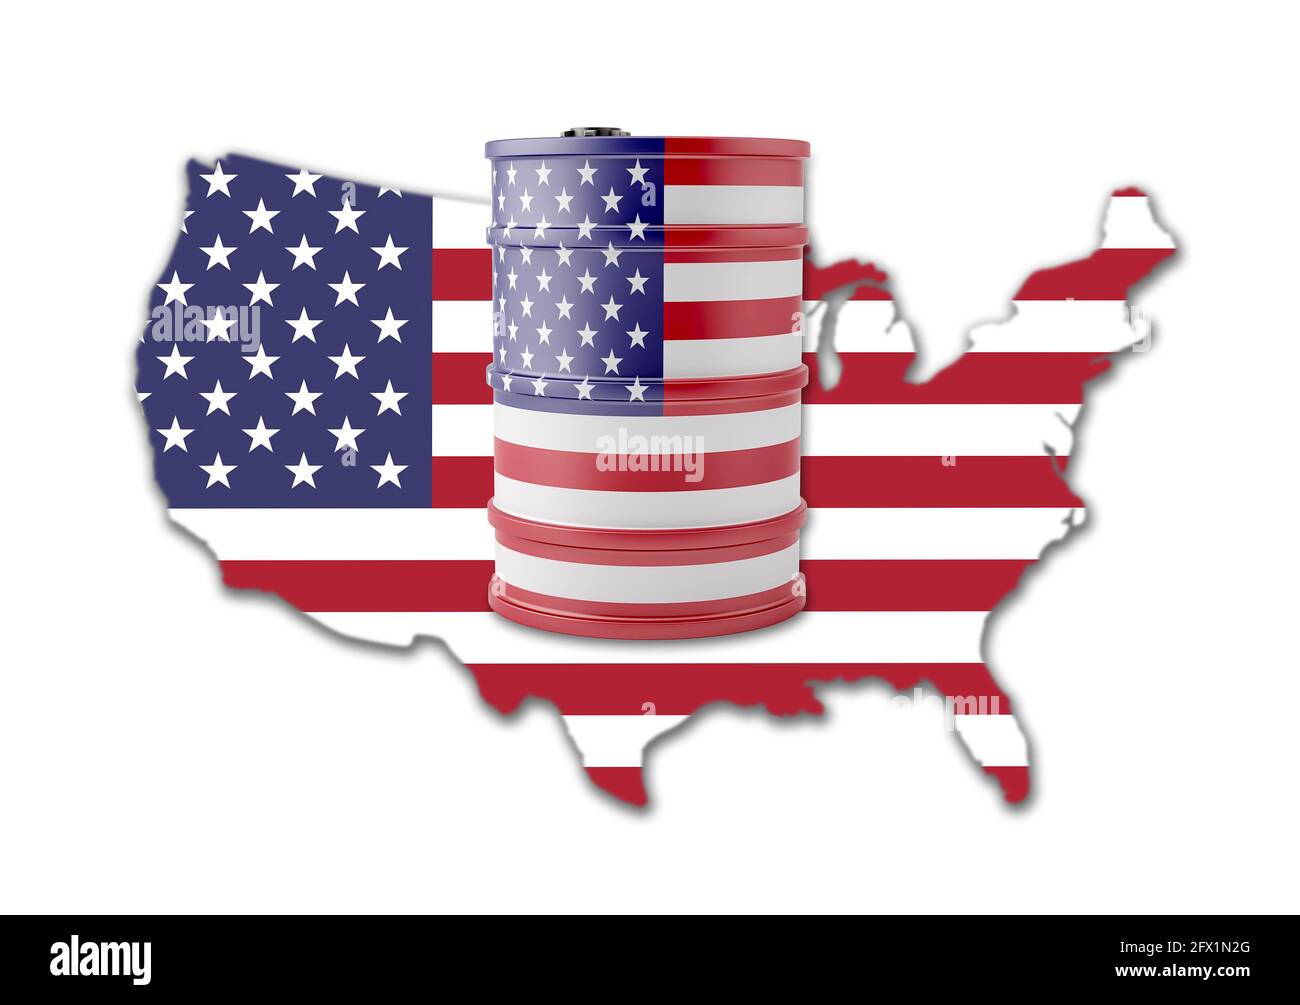 Oil drum in USA flag design in front of USA state silhouette. 3D Rendering Stock Photo